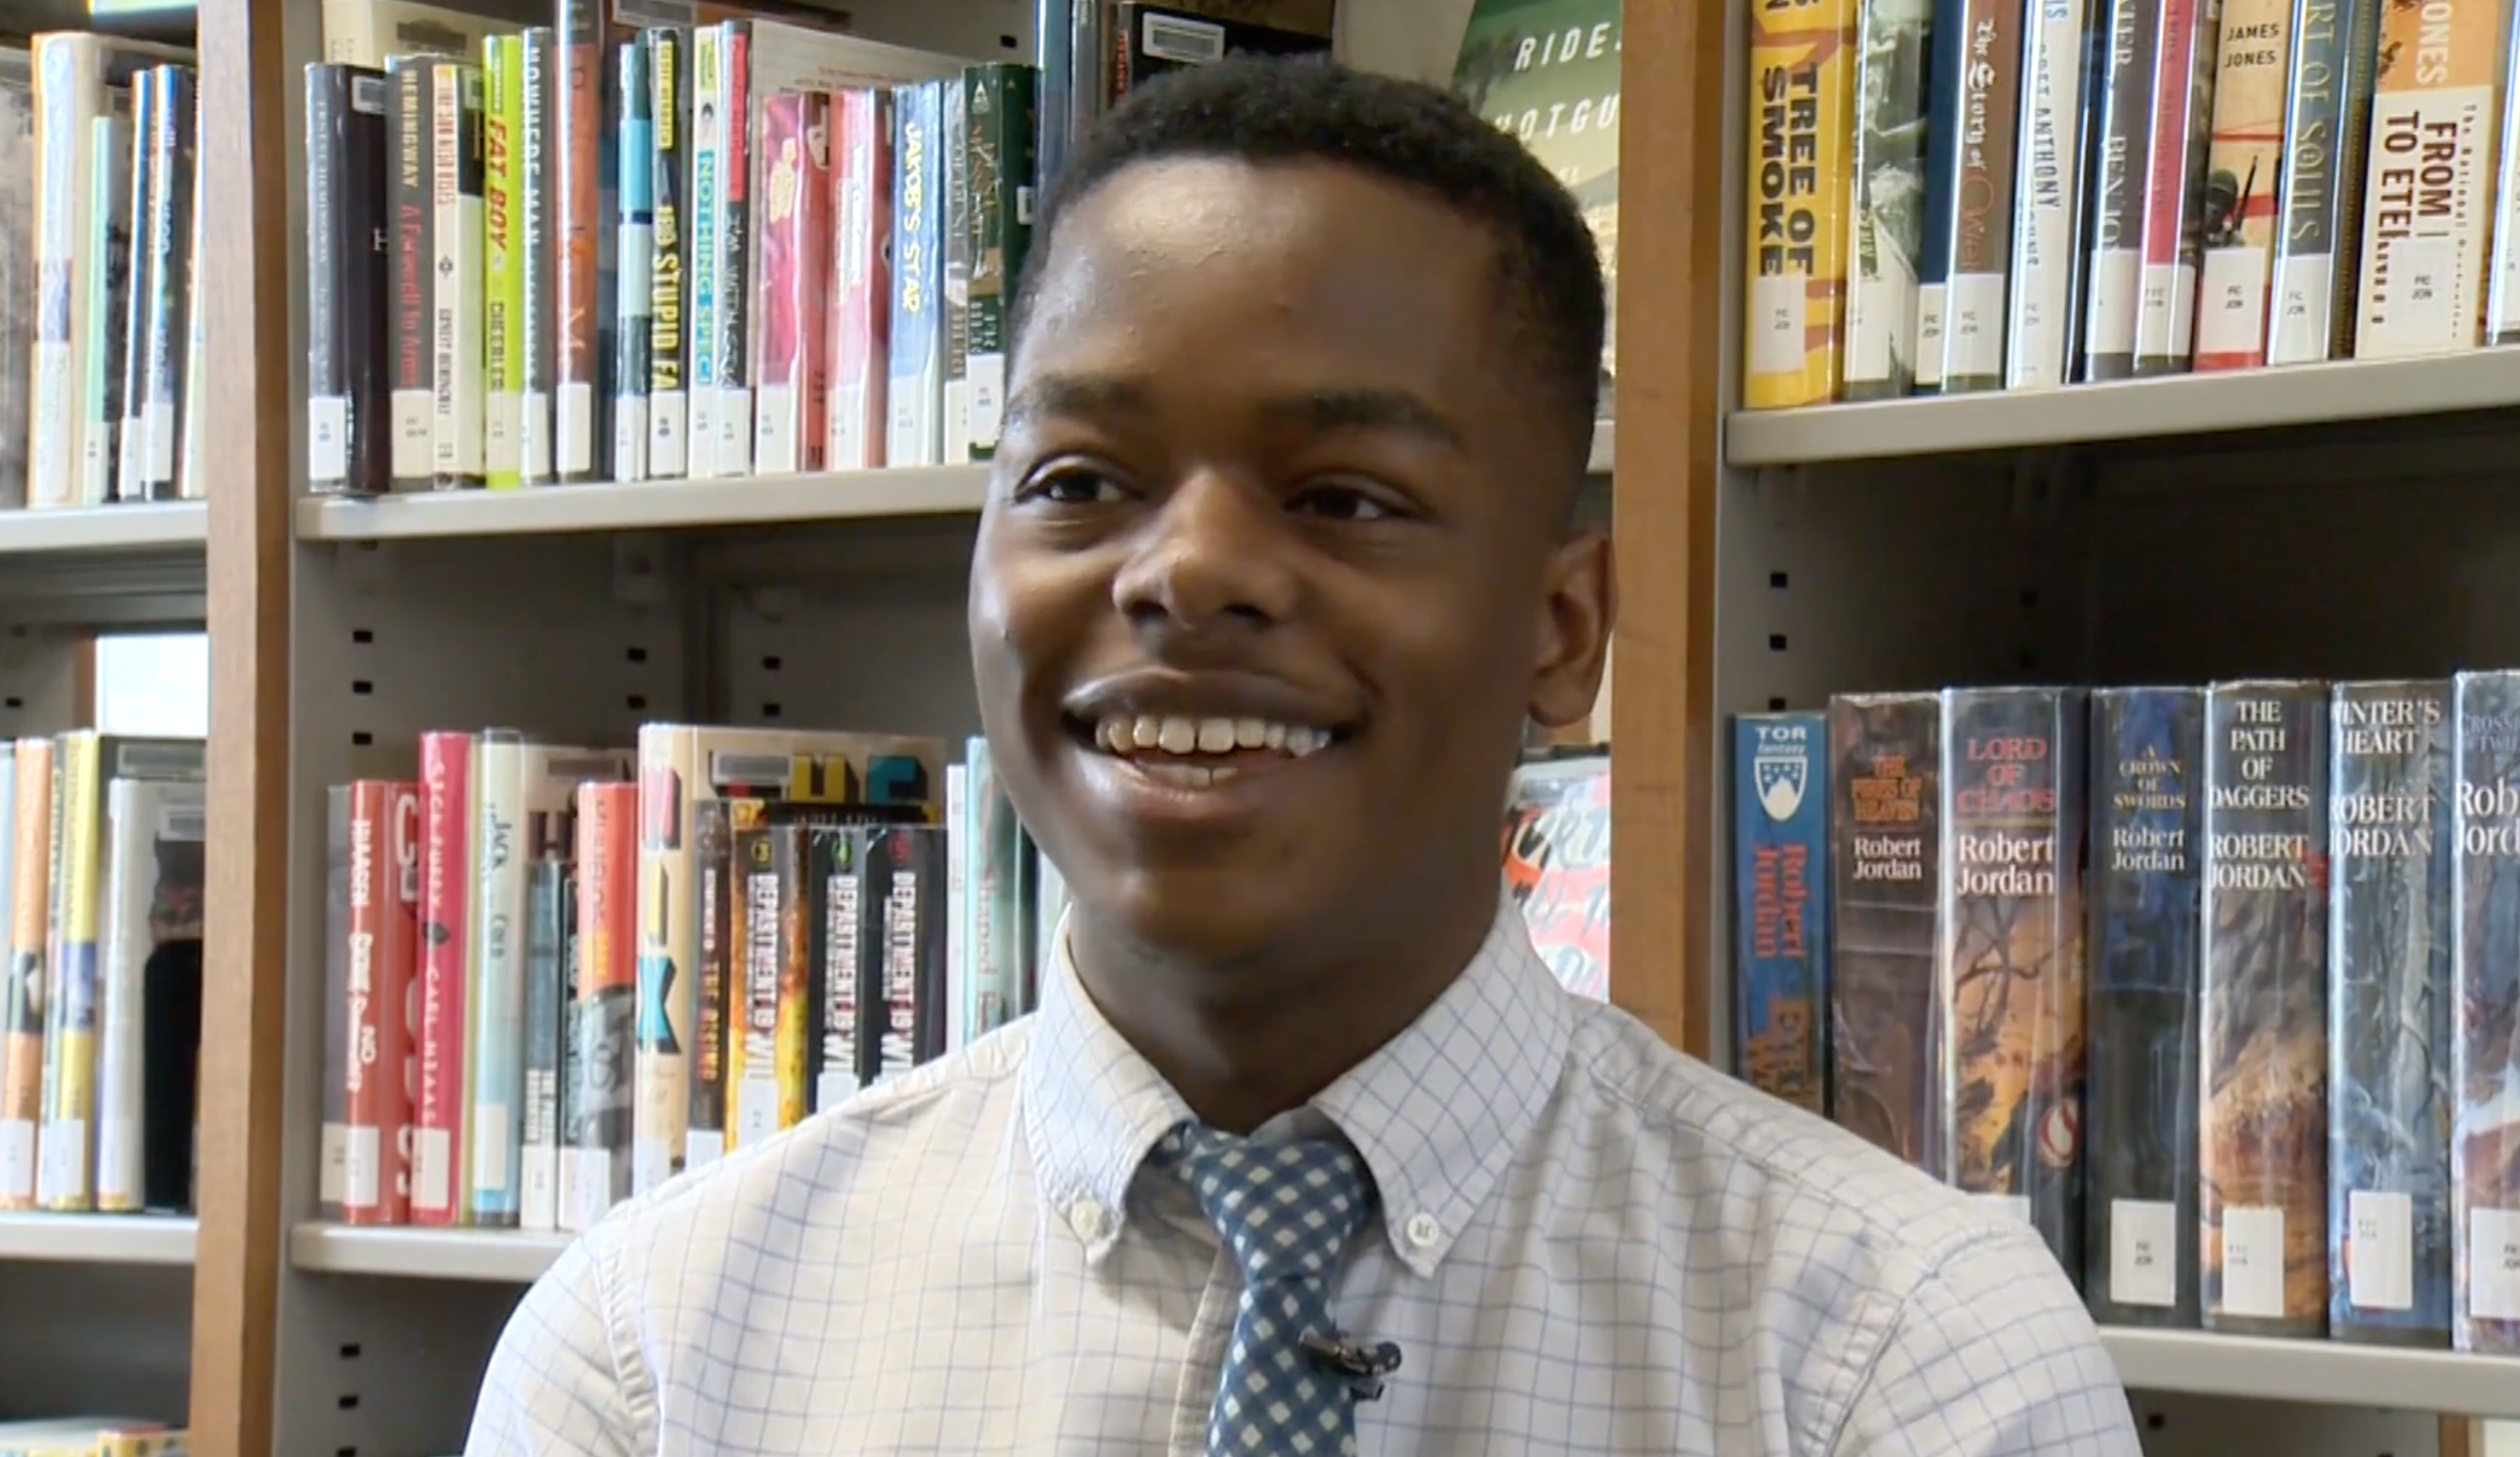 Mekhi Johnson has dreamt of Ivy League schools since he was 6 years old.